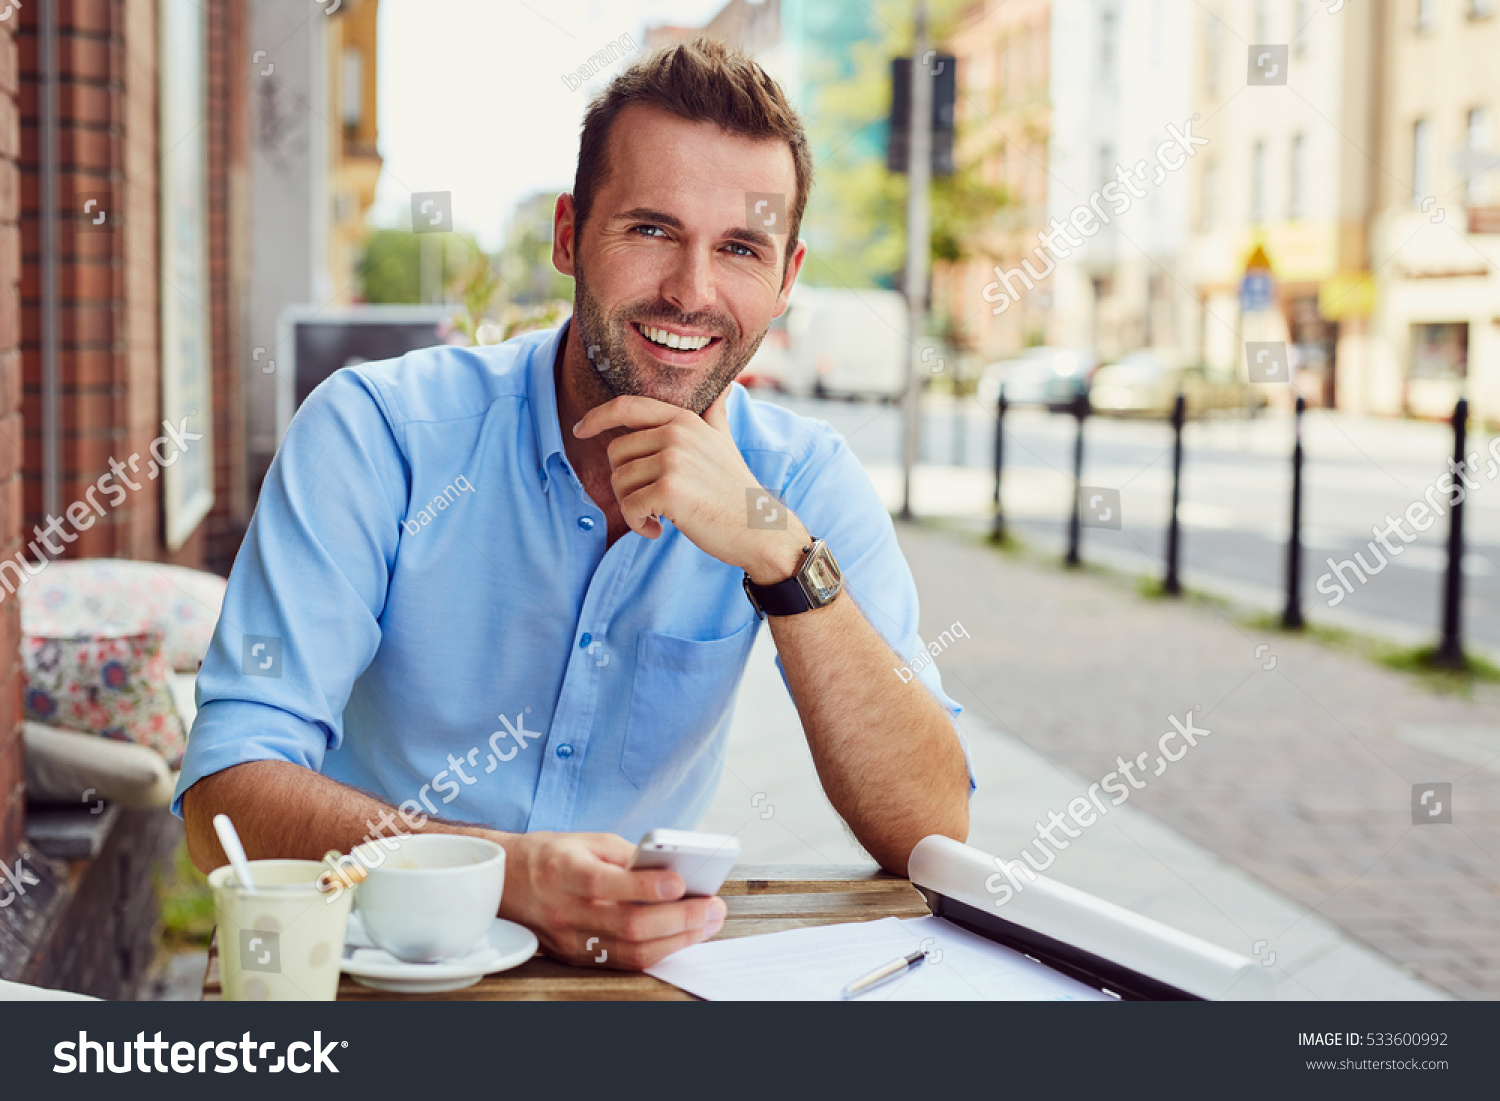 Happy man having coffee break at outdoors cafe during nice summer day #533600992